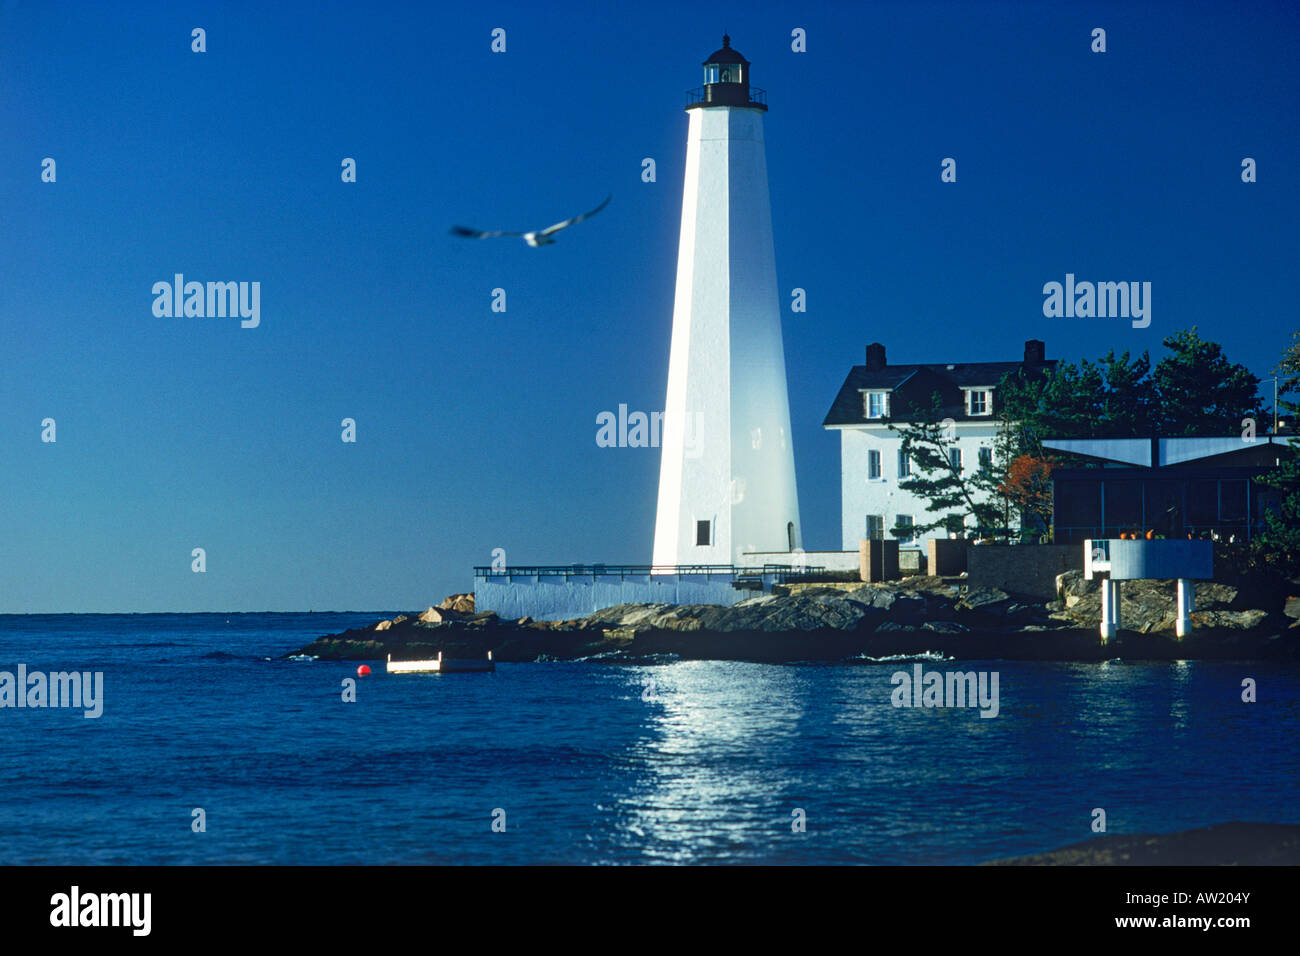 New London Harbor Lighthouse at New London, Connecticut Stock Photo